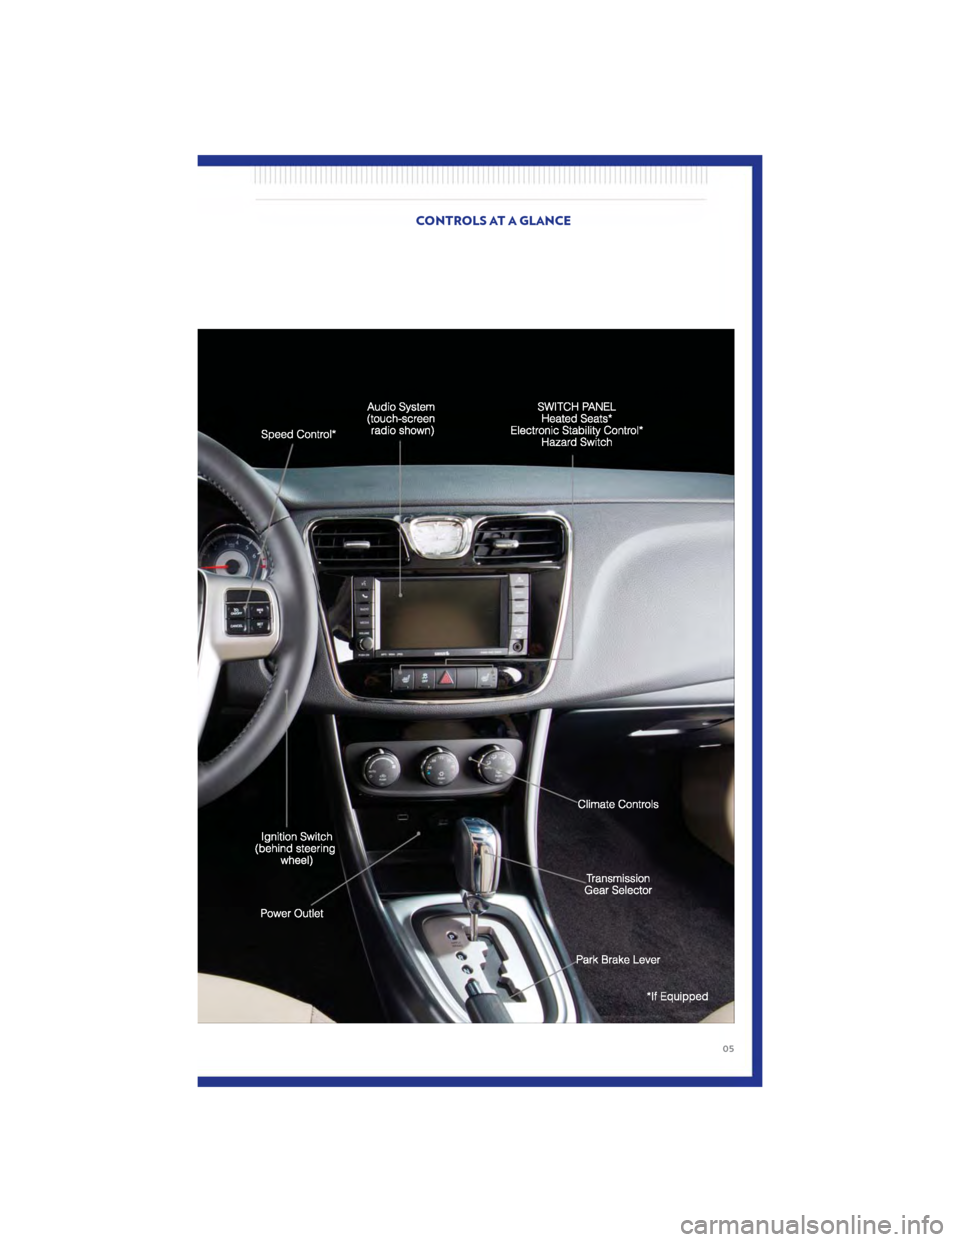 CHRYSLER 200 2011 1.G User Guide CONTROLS AT A GLANCE
05 